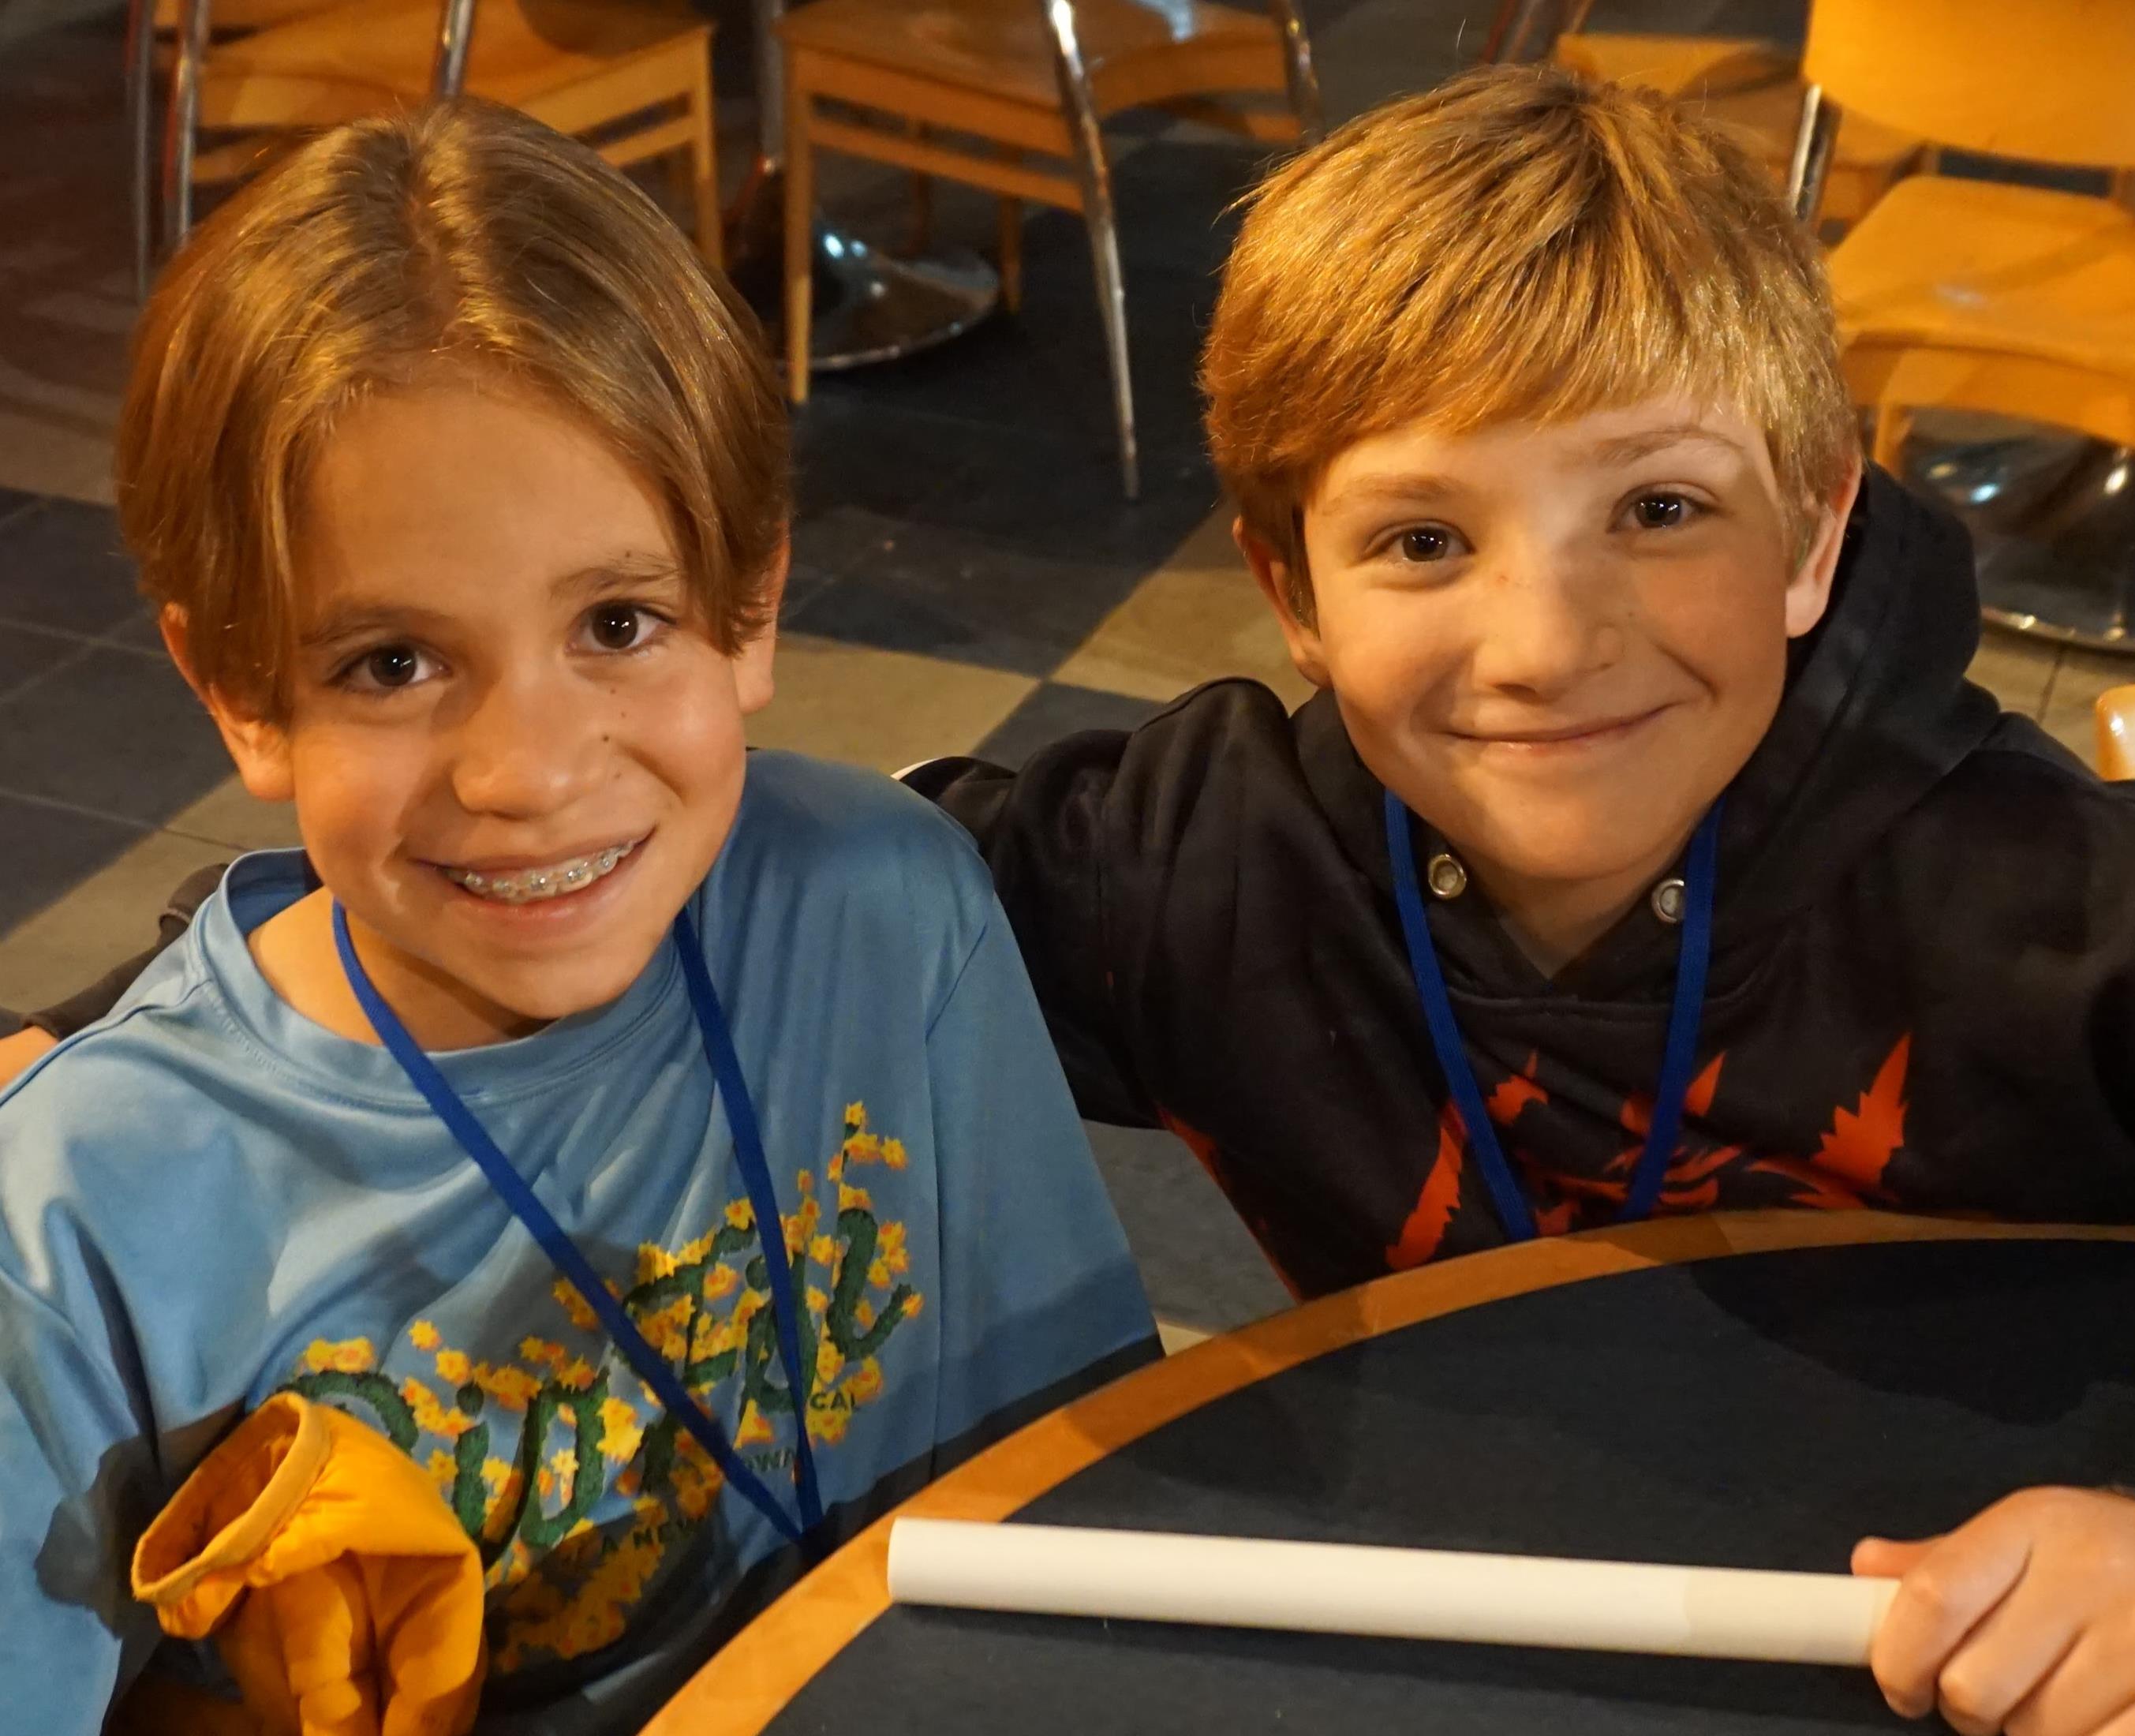 Two boys sitting at a table smiling